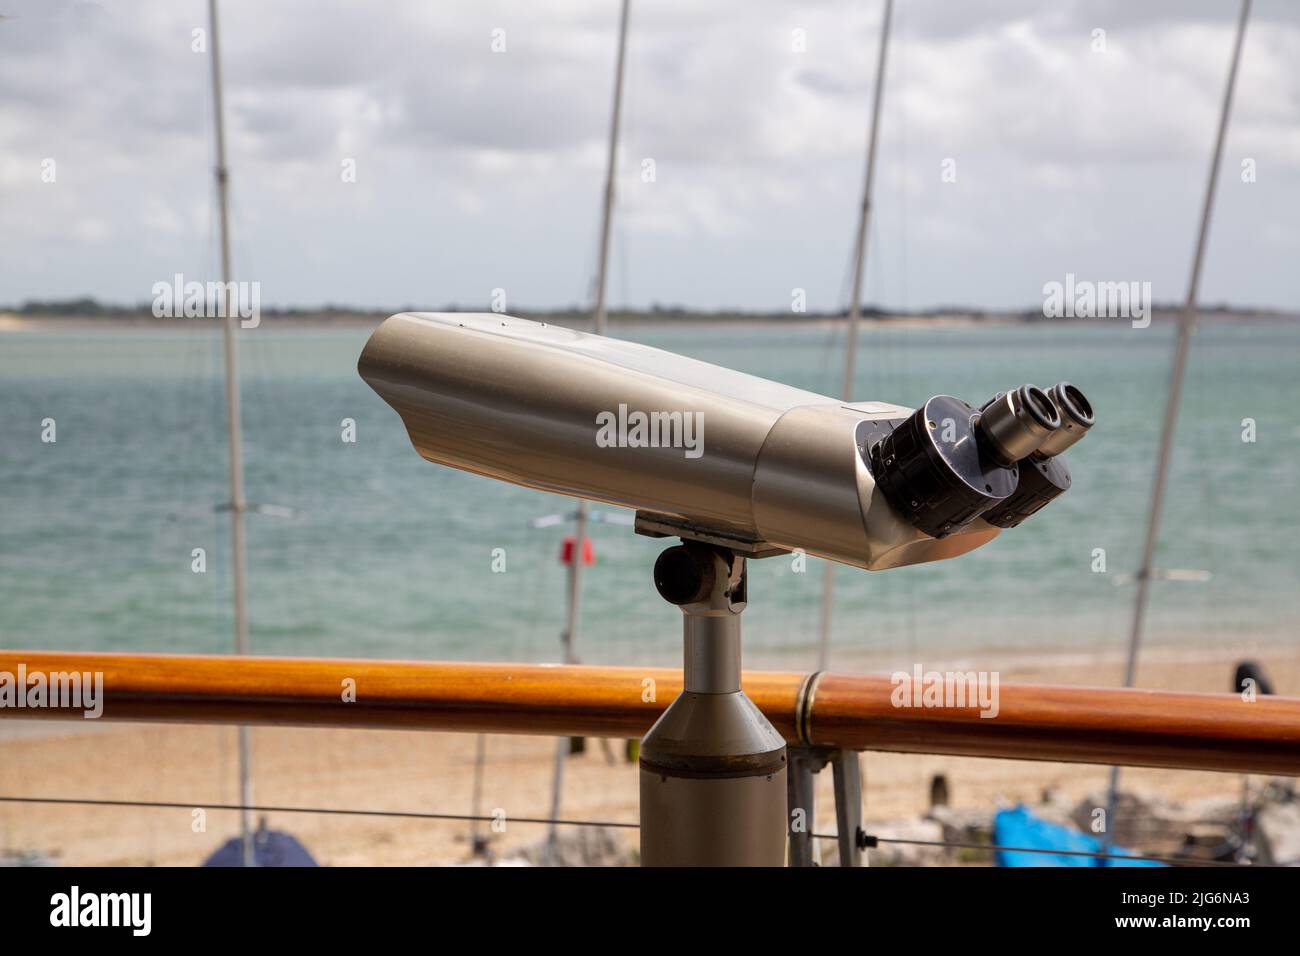 A mounted telescope on a balcony looking out to sea Stock Photo